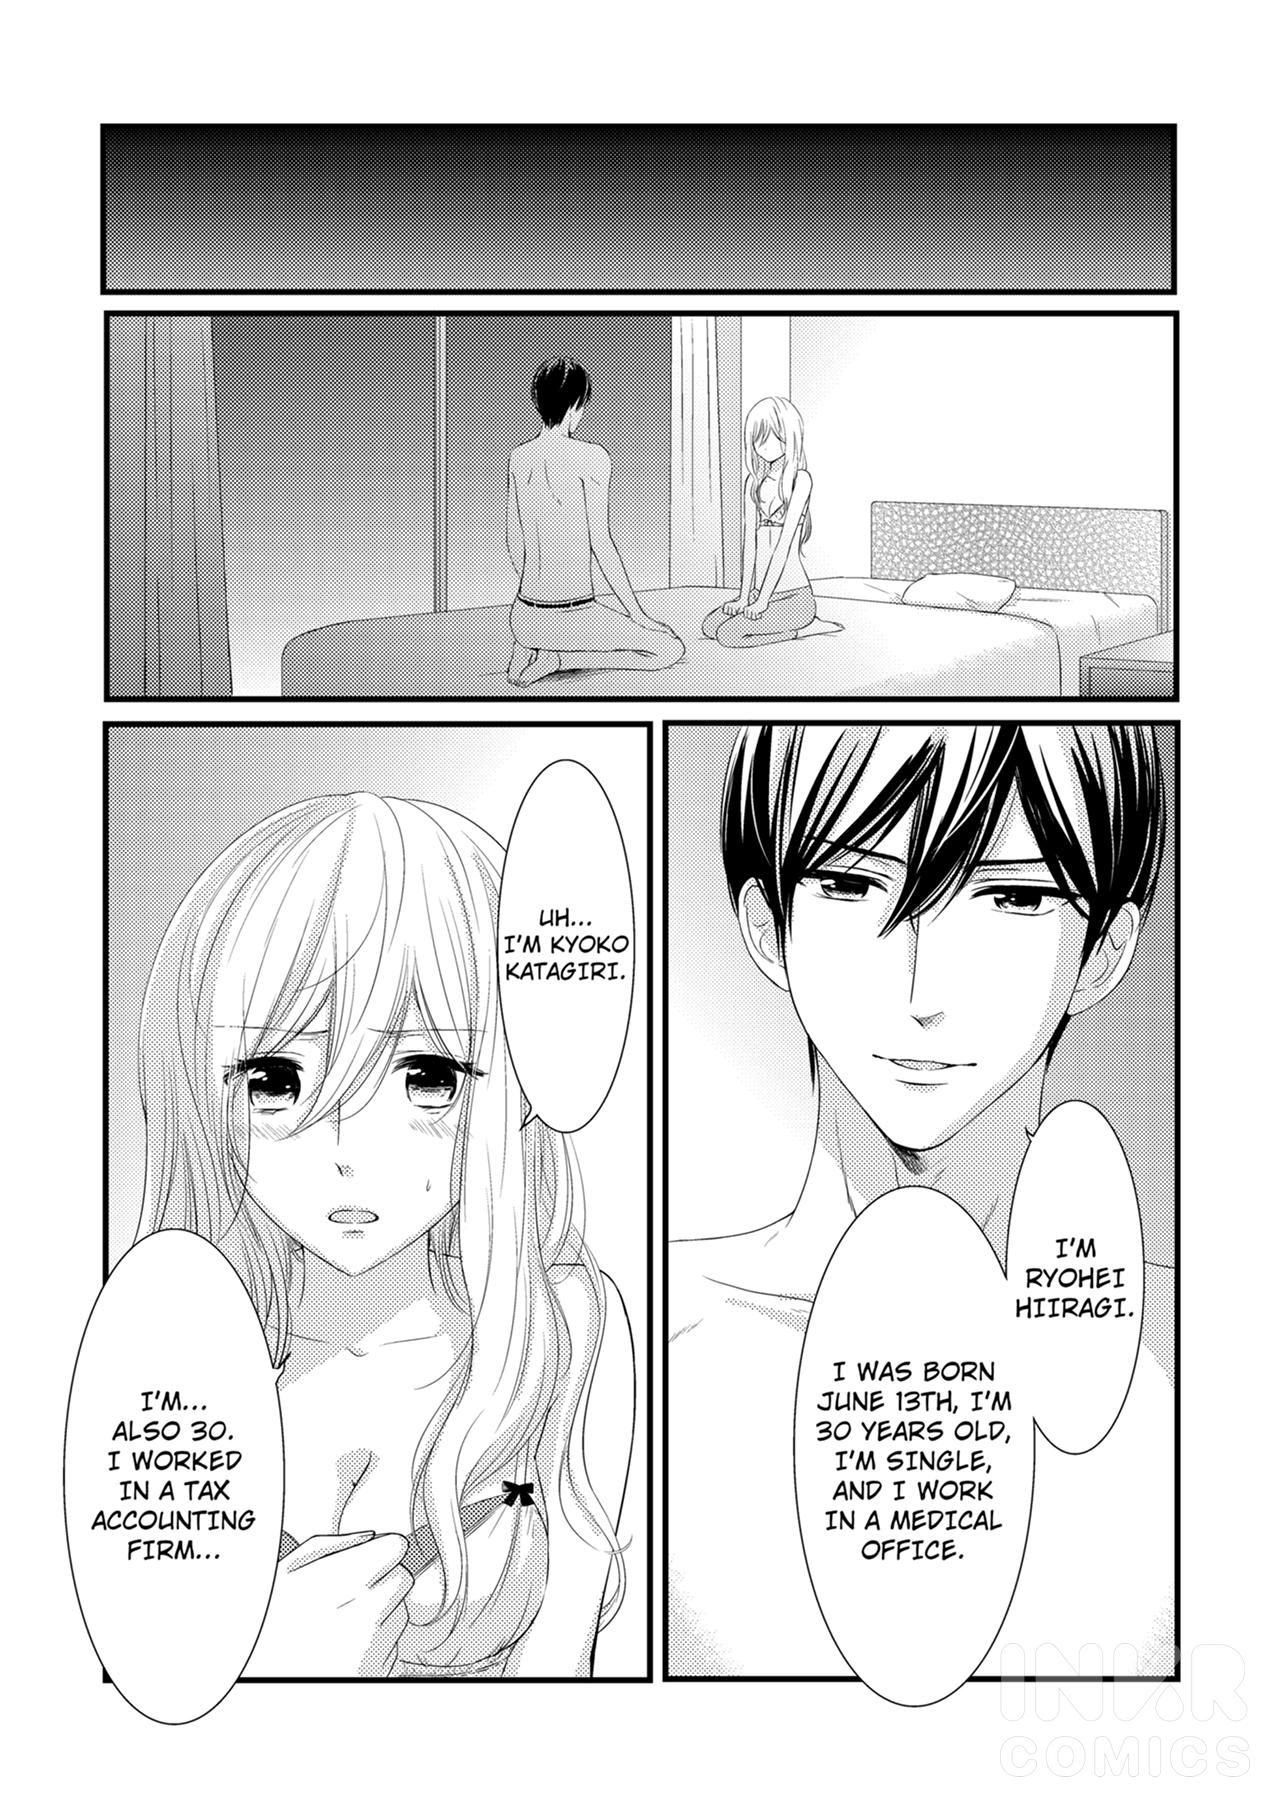 Sleep On My Chest. -A Sexual Prescription For A Childhood Friend - Page 2